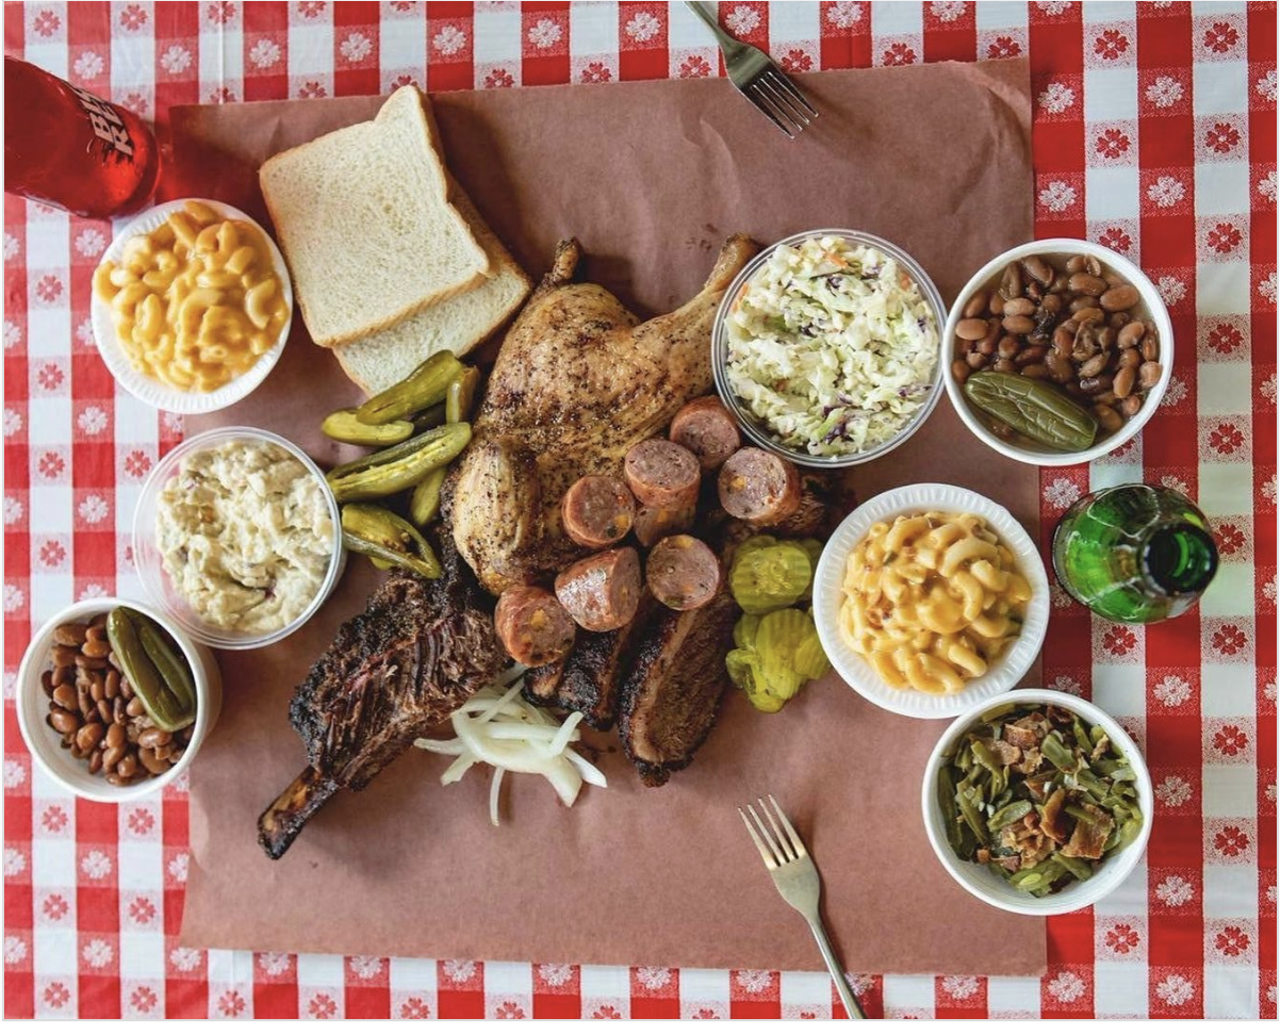 Cooper’s Pld Time Pit Bar-B-Que
1125 State Highway 337 Loop, New Braunfels, (830) 627-0627, coopersbbq.com
Cooper’s offer 13 kinds of meat, so you know this is a spot every Texan should visit at least once. You can also munch on a variety of side dishes, including mac ‘n’ cheese, cole slaw, potato salad and hot cobbler.
Photo via Instagram / coopersbbq